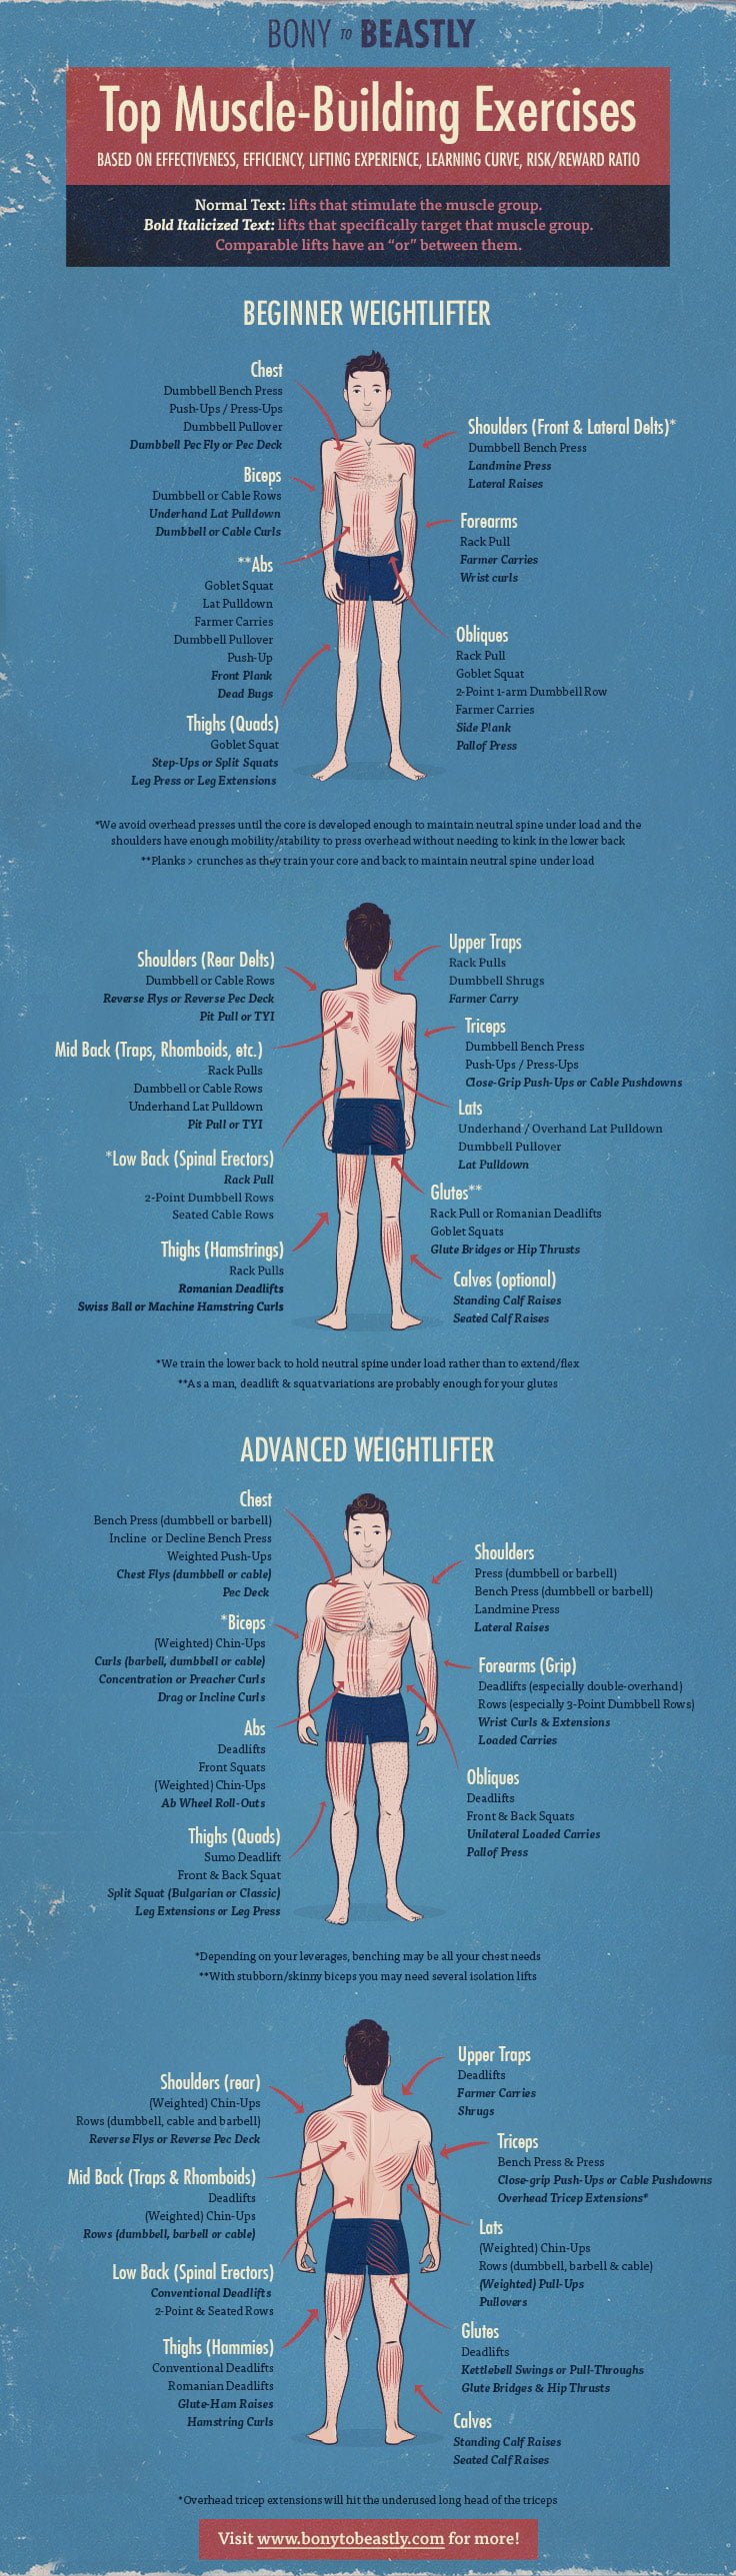 Top Muscle Building Exercises Infographic